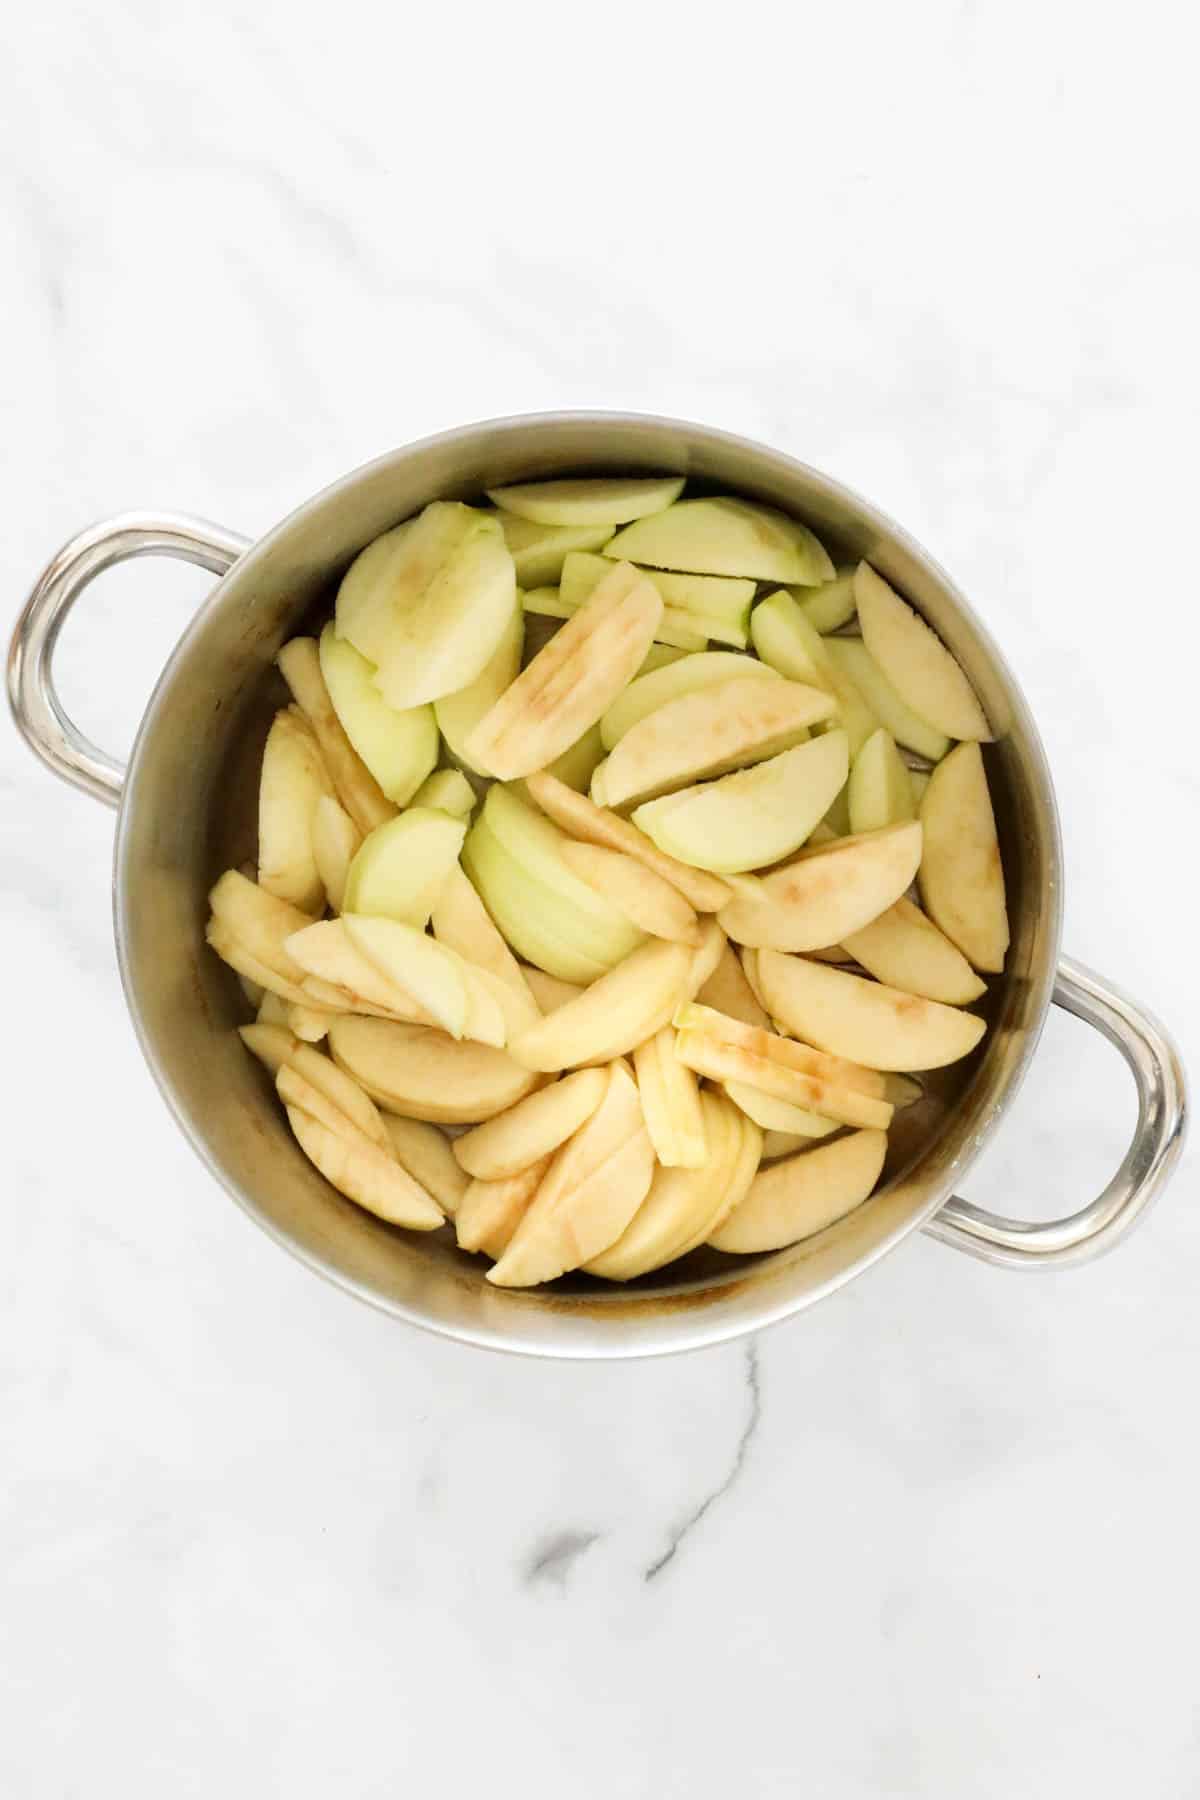 Sliced peeled apples in a large pan.